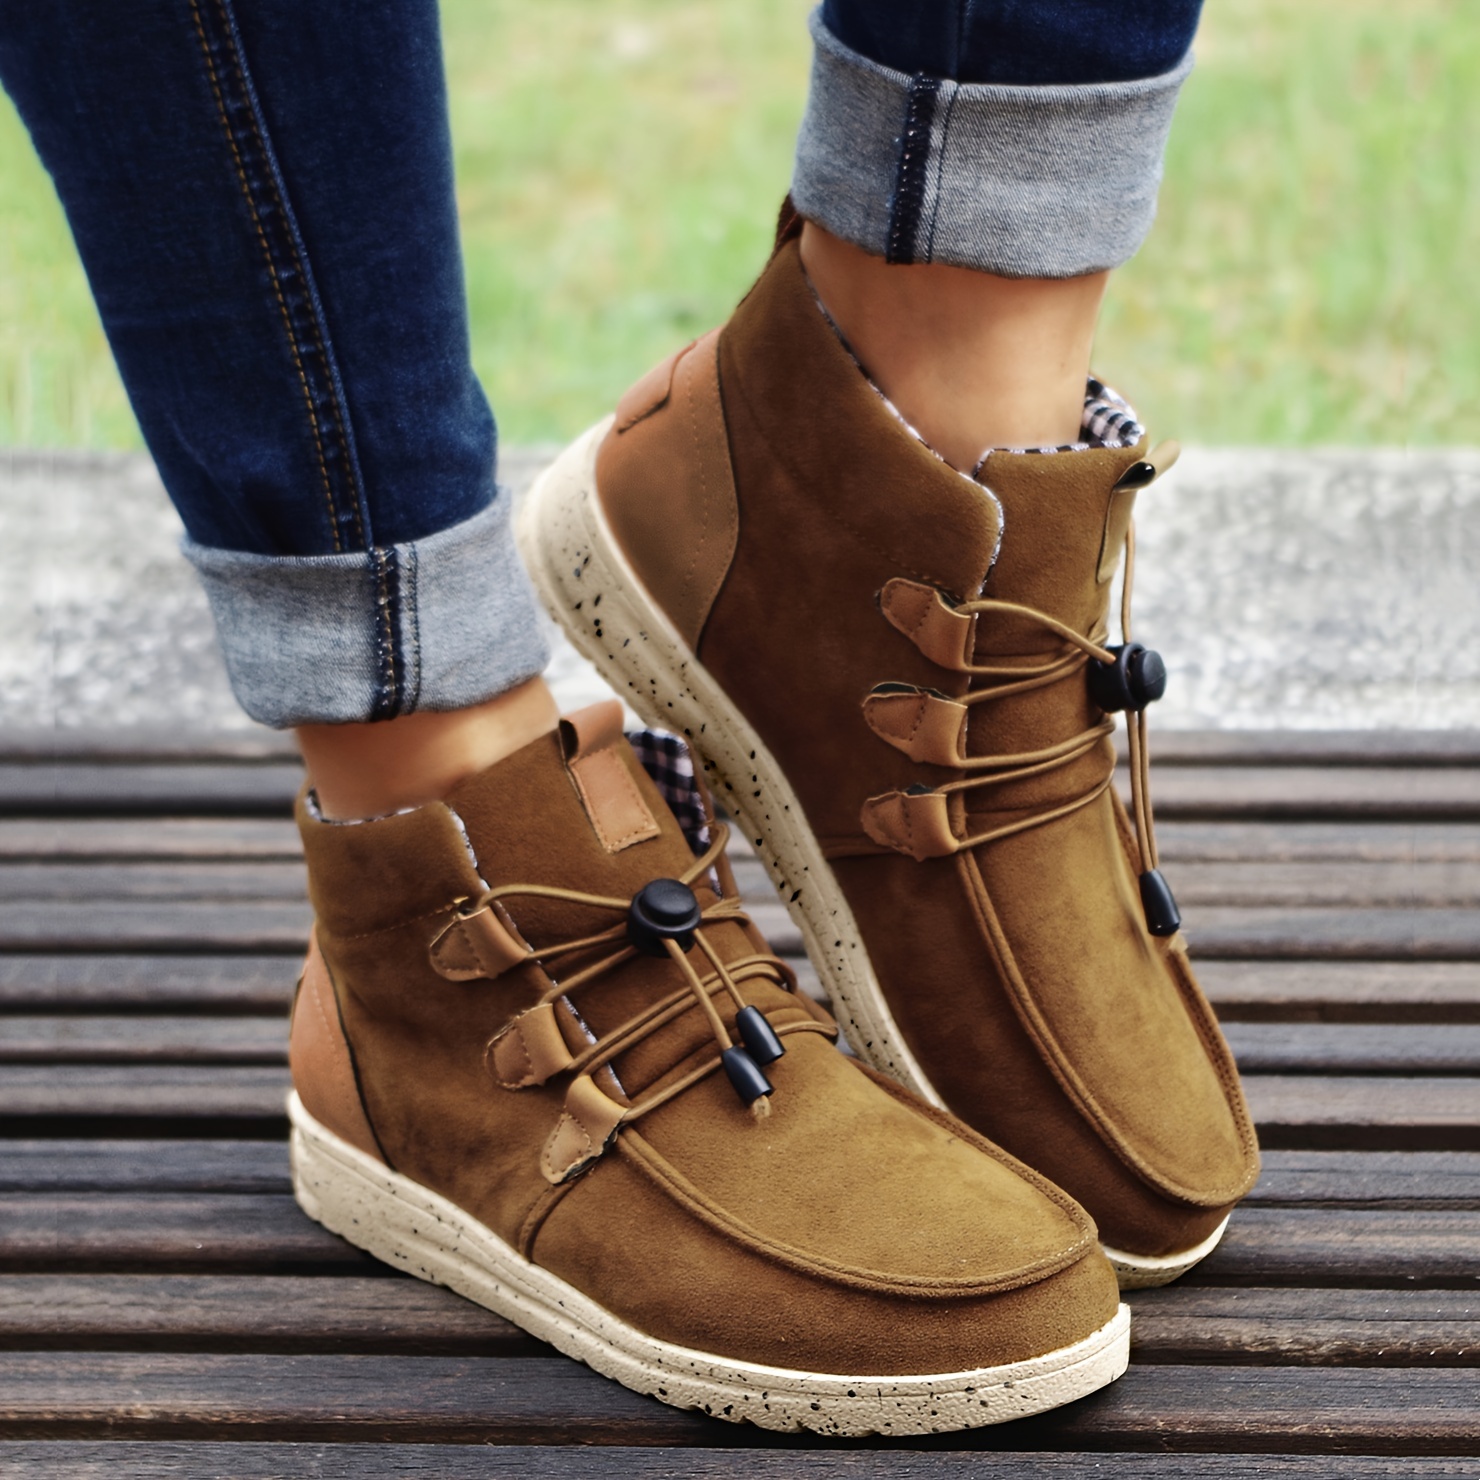 

Women's High Top Sneaker Boots, Comfortable Round Toe Drawstring Shoes, Casual Warm Short Boots